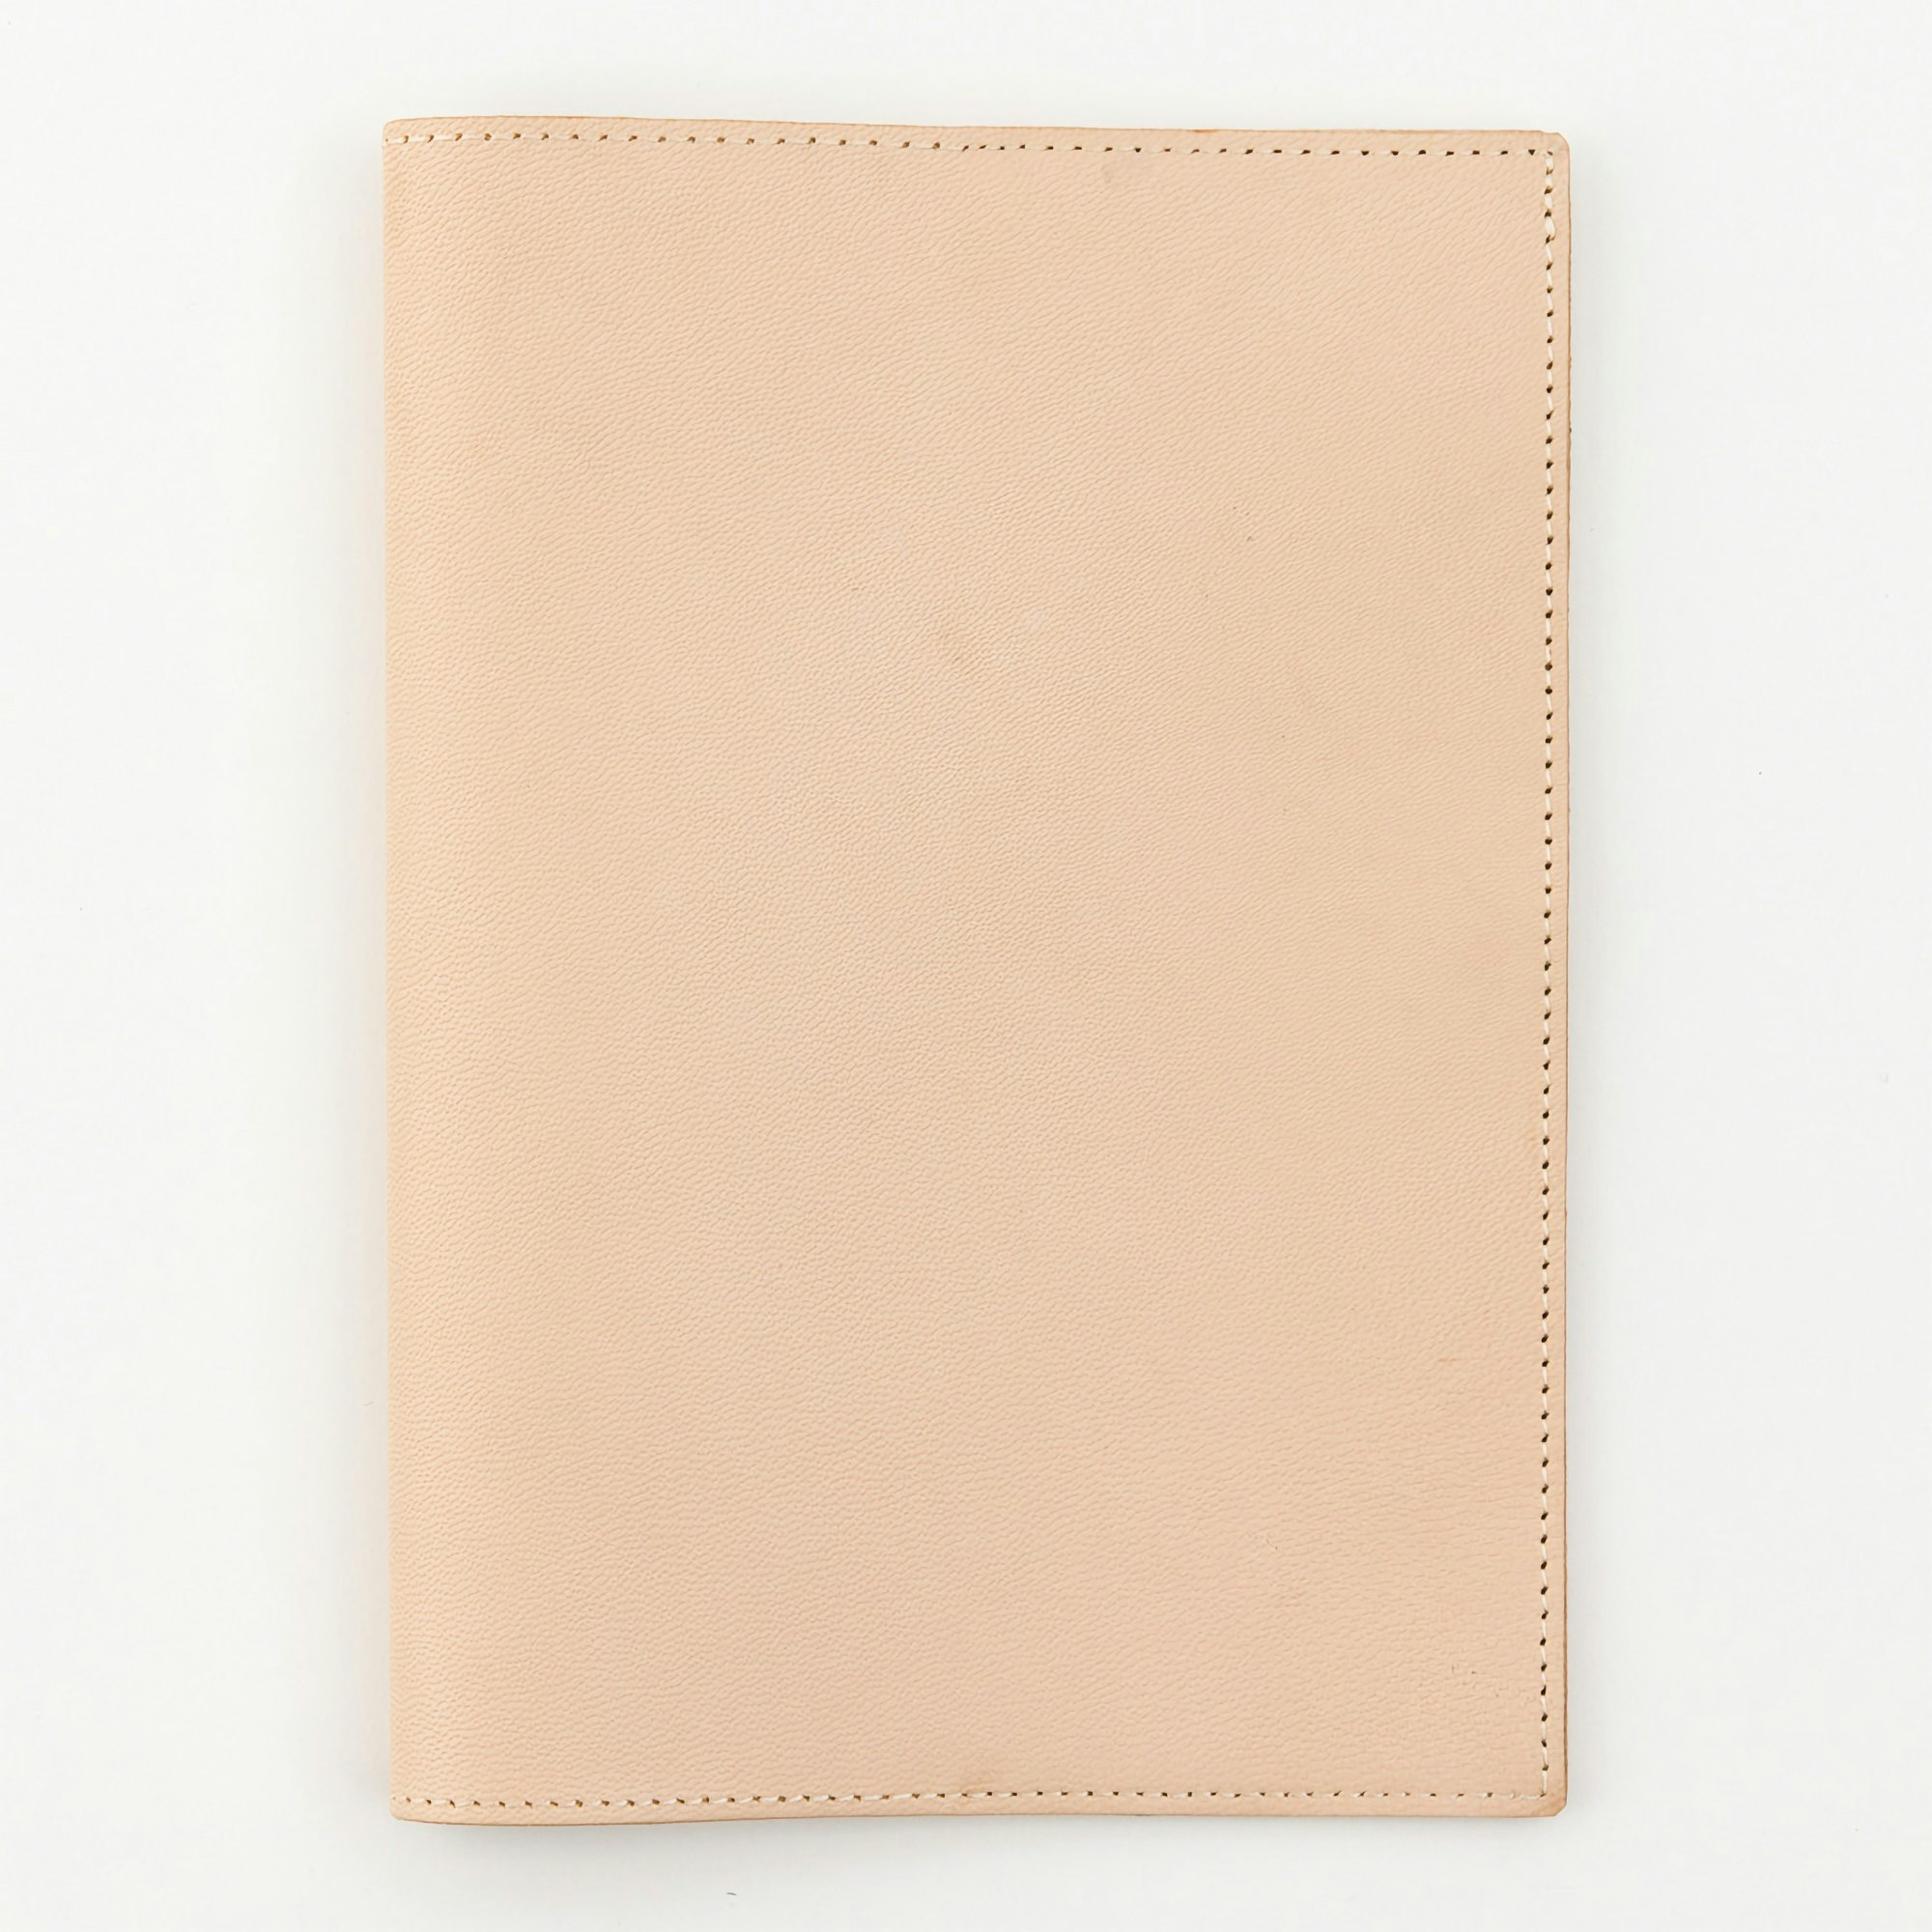 Midori MD Goat Leather Cover [A5]